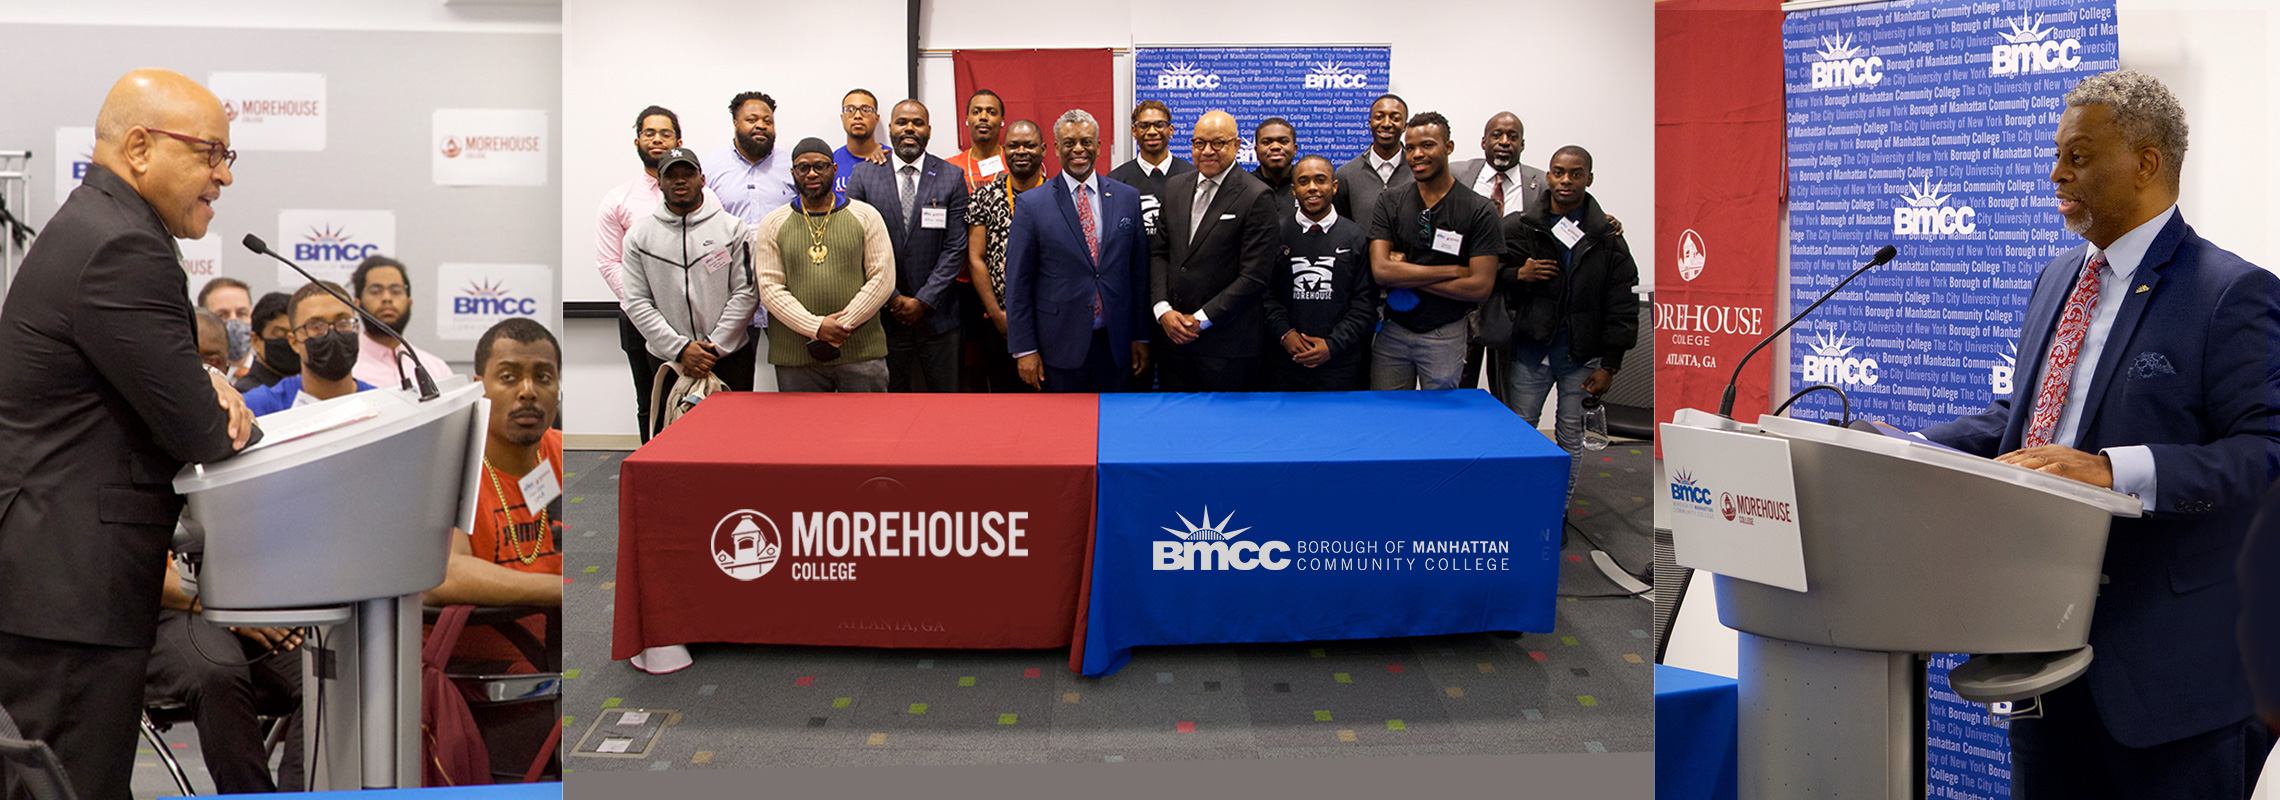 BMCC President Anthony E. Munroe and Morehouse College President David A. Thomas and other participants